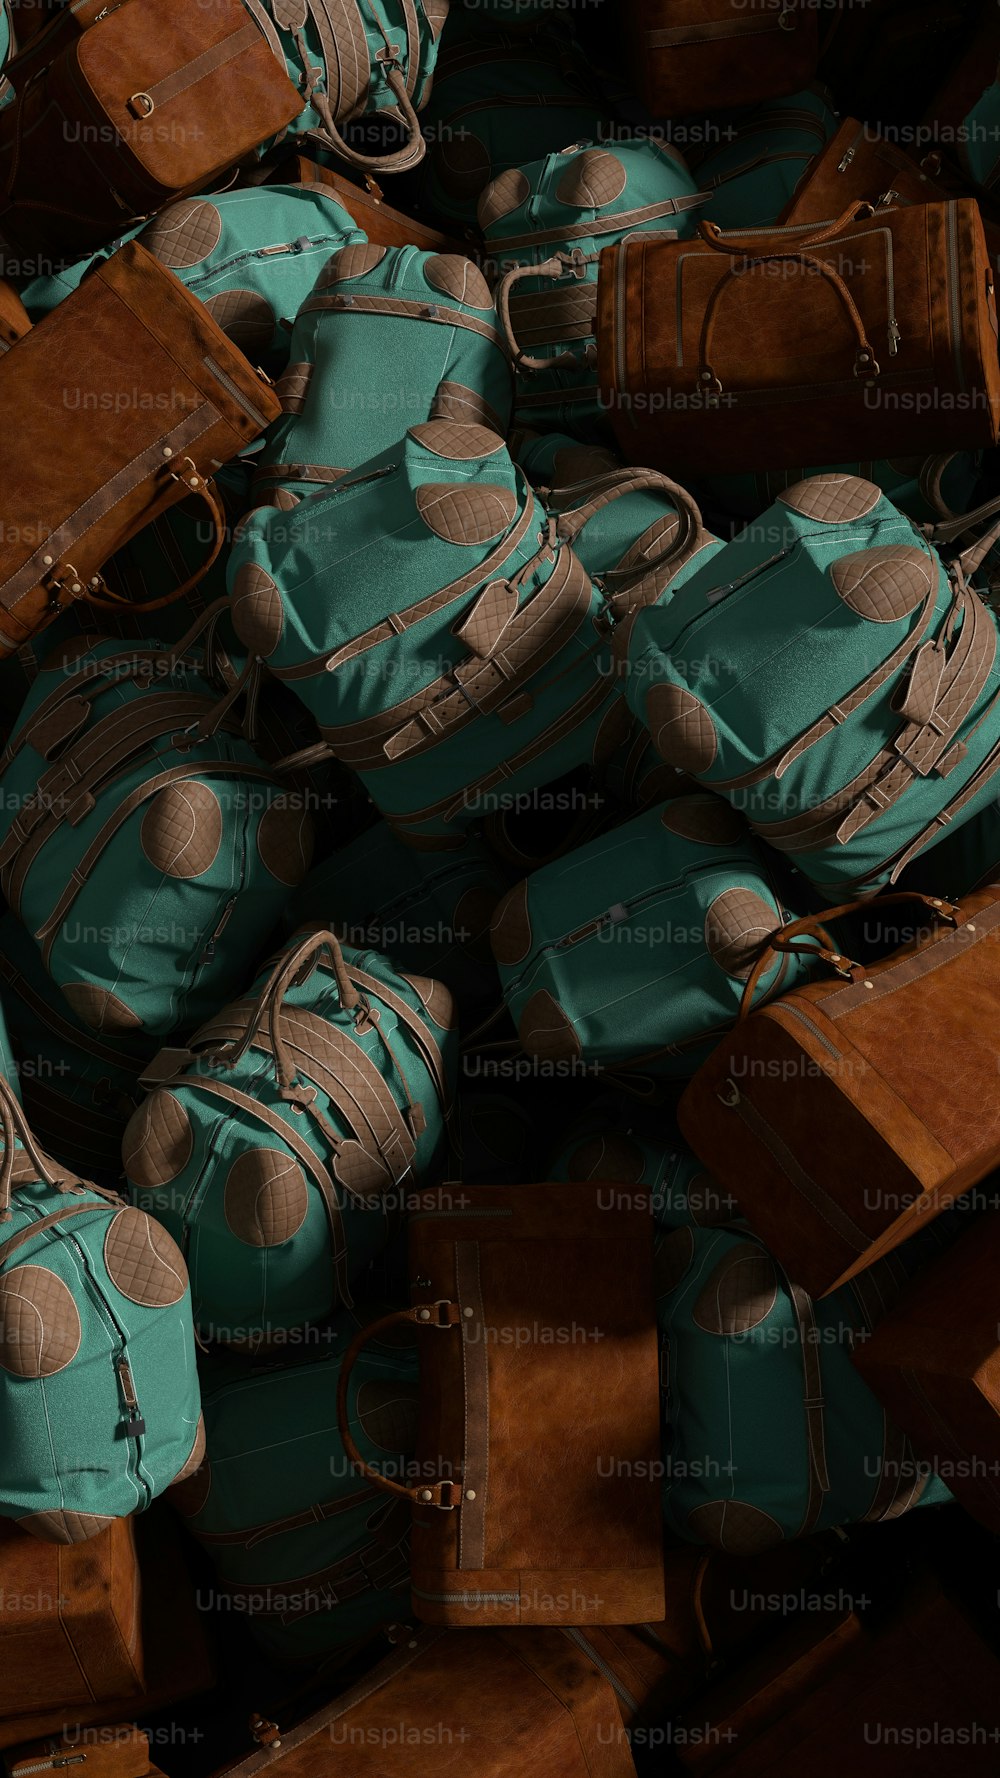 a pile of brown and teal bags and suitcases